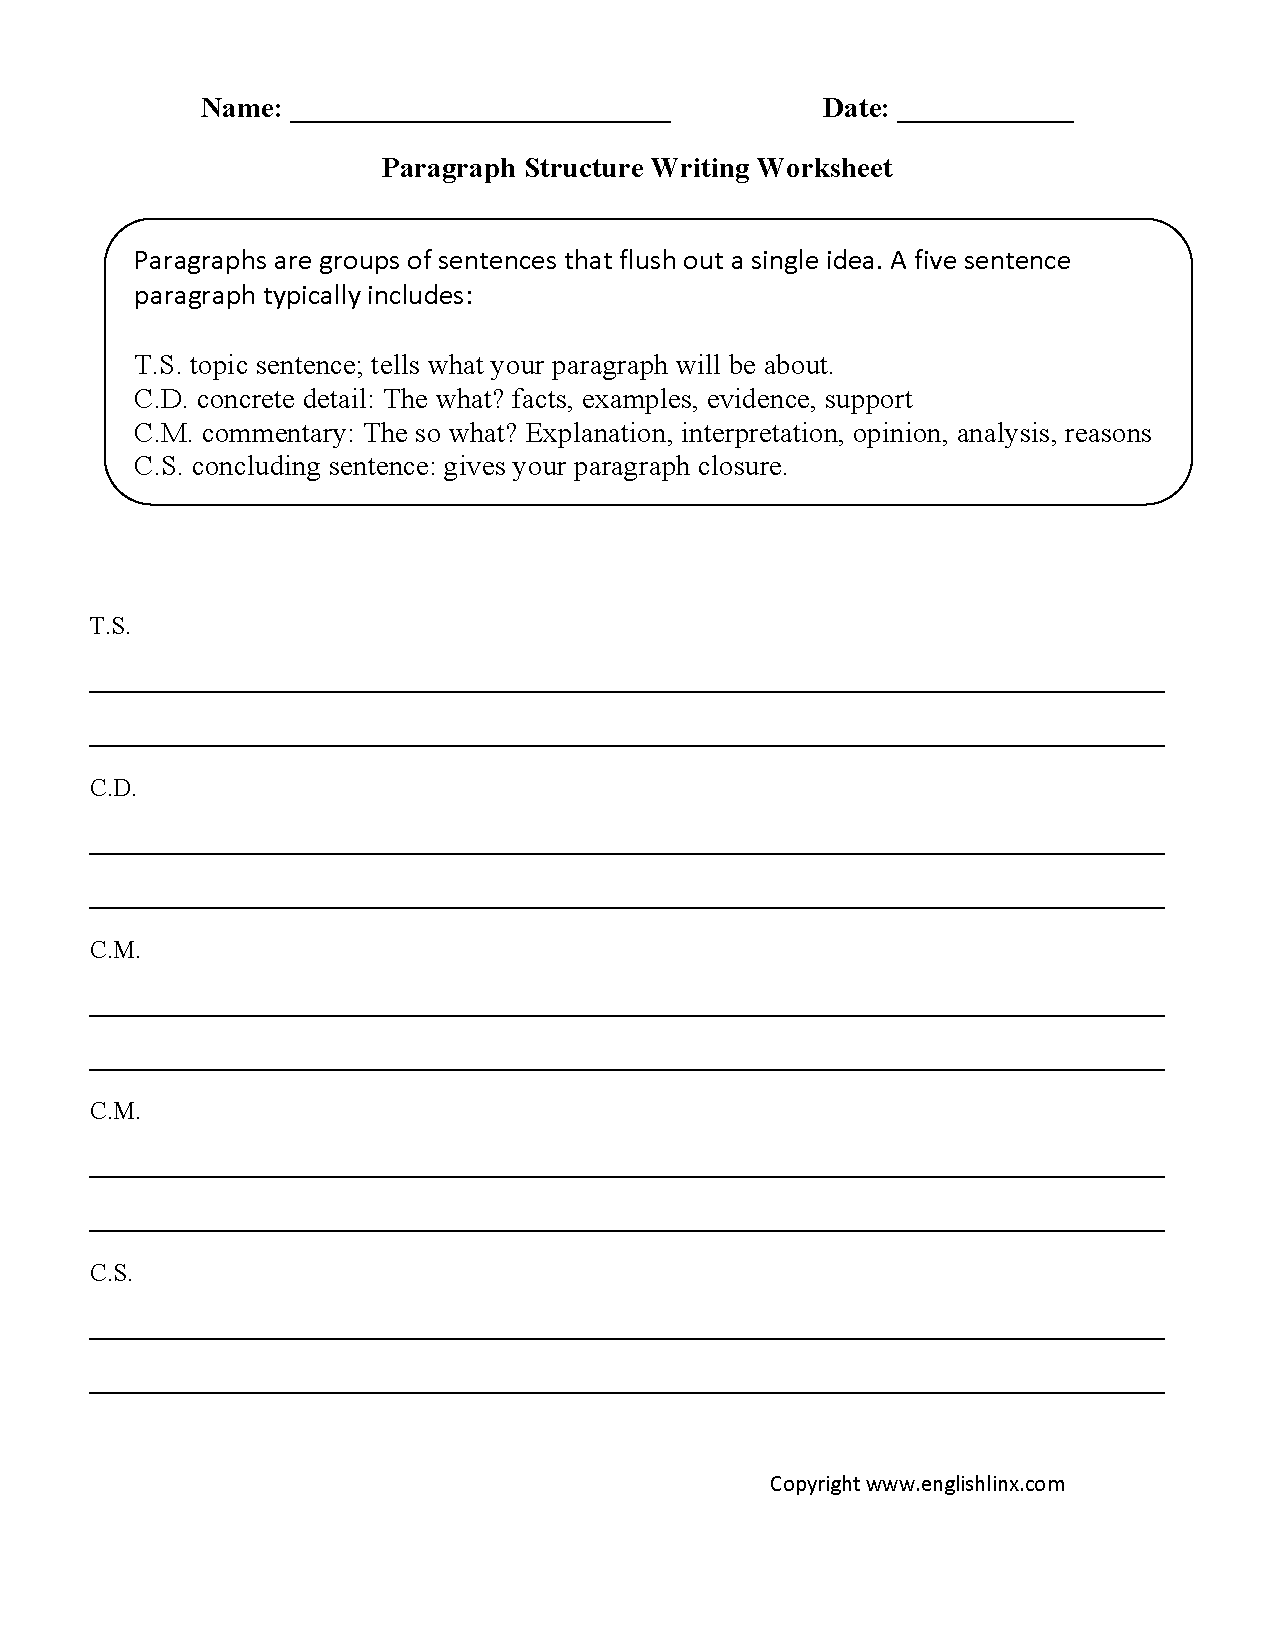 16-best-images-of-free-paragraph-writing-worksheets-creative-writing